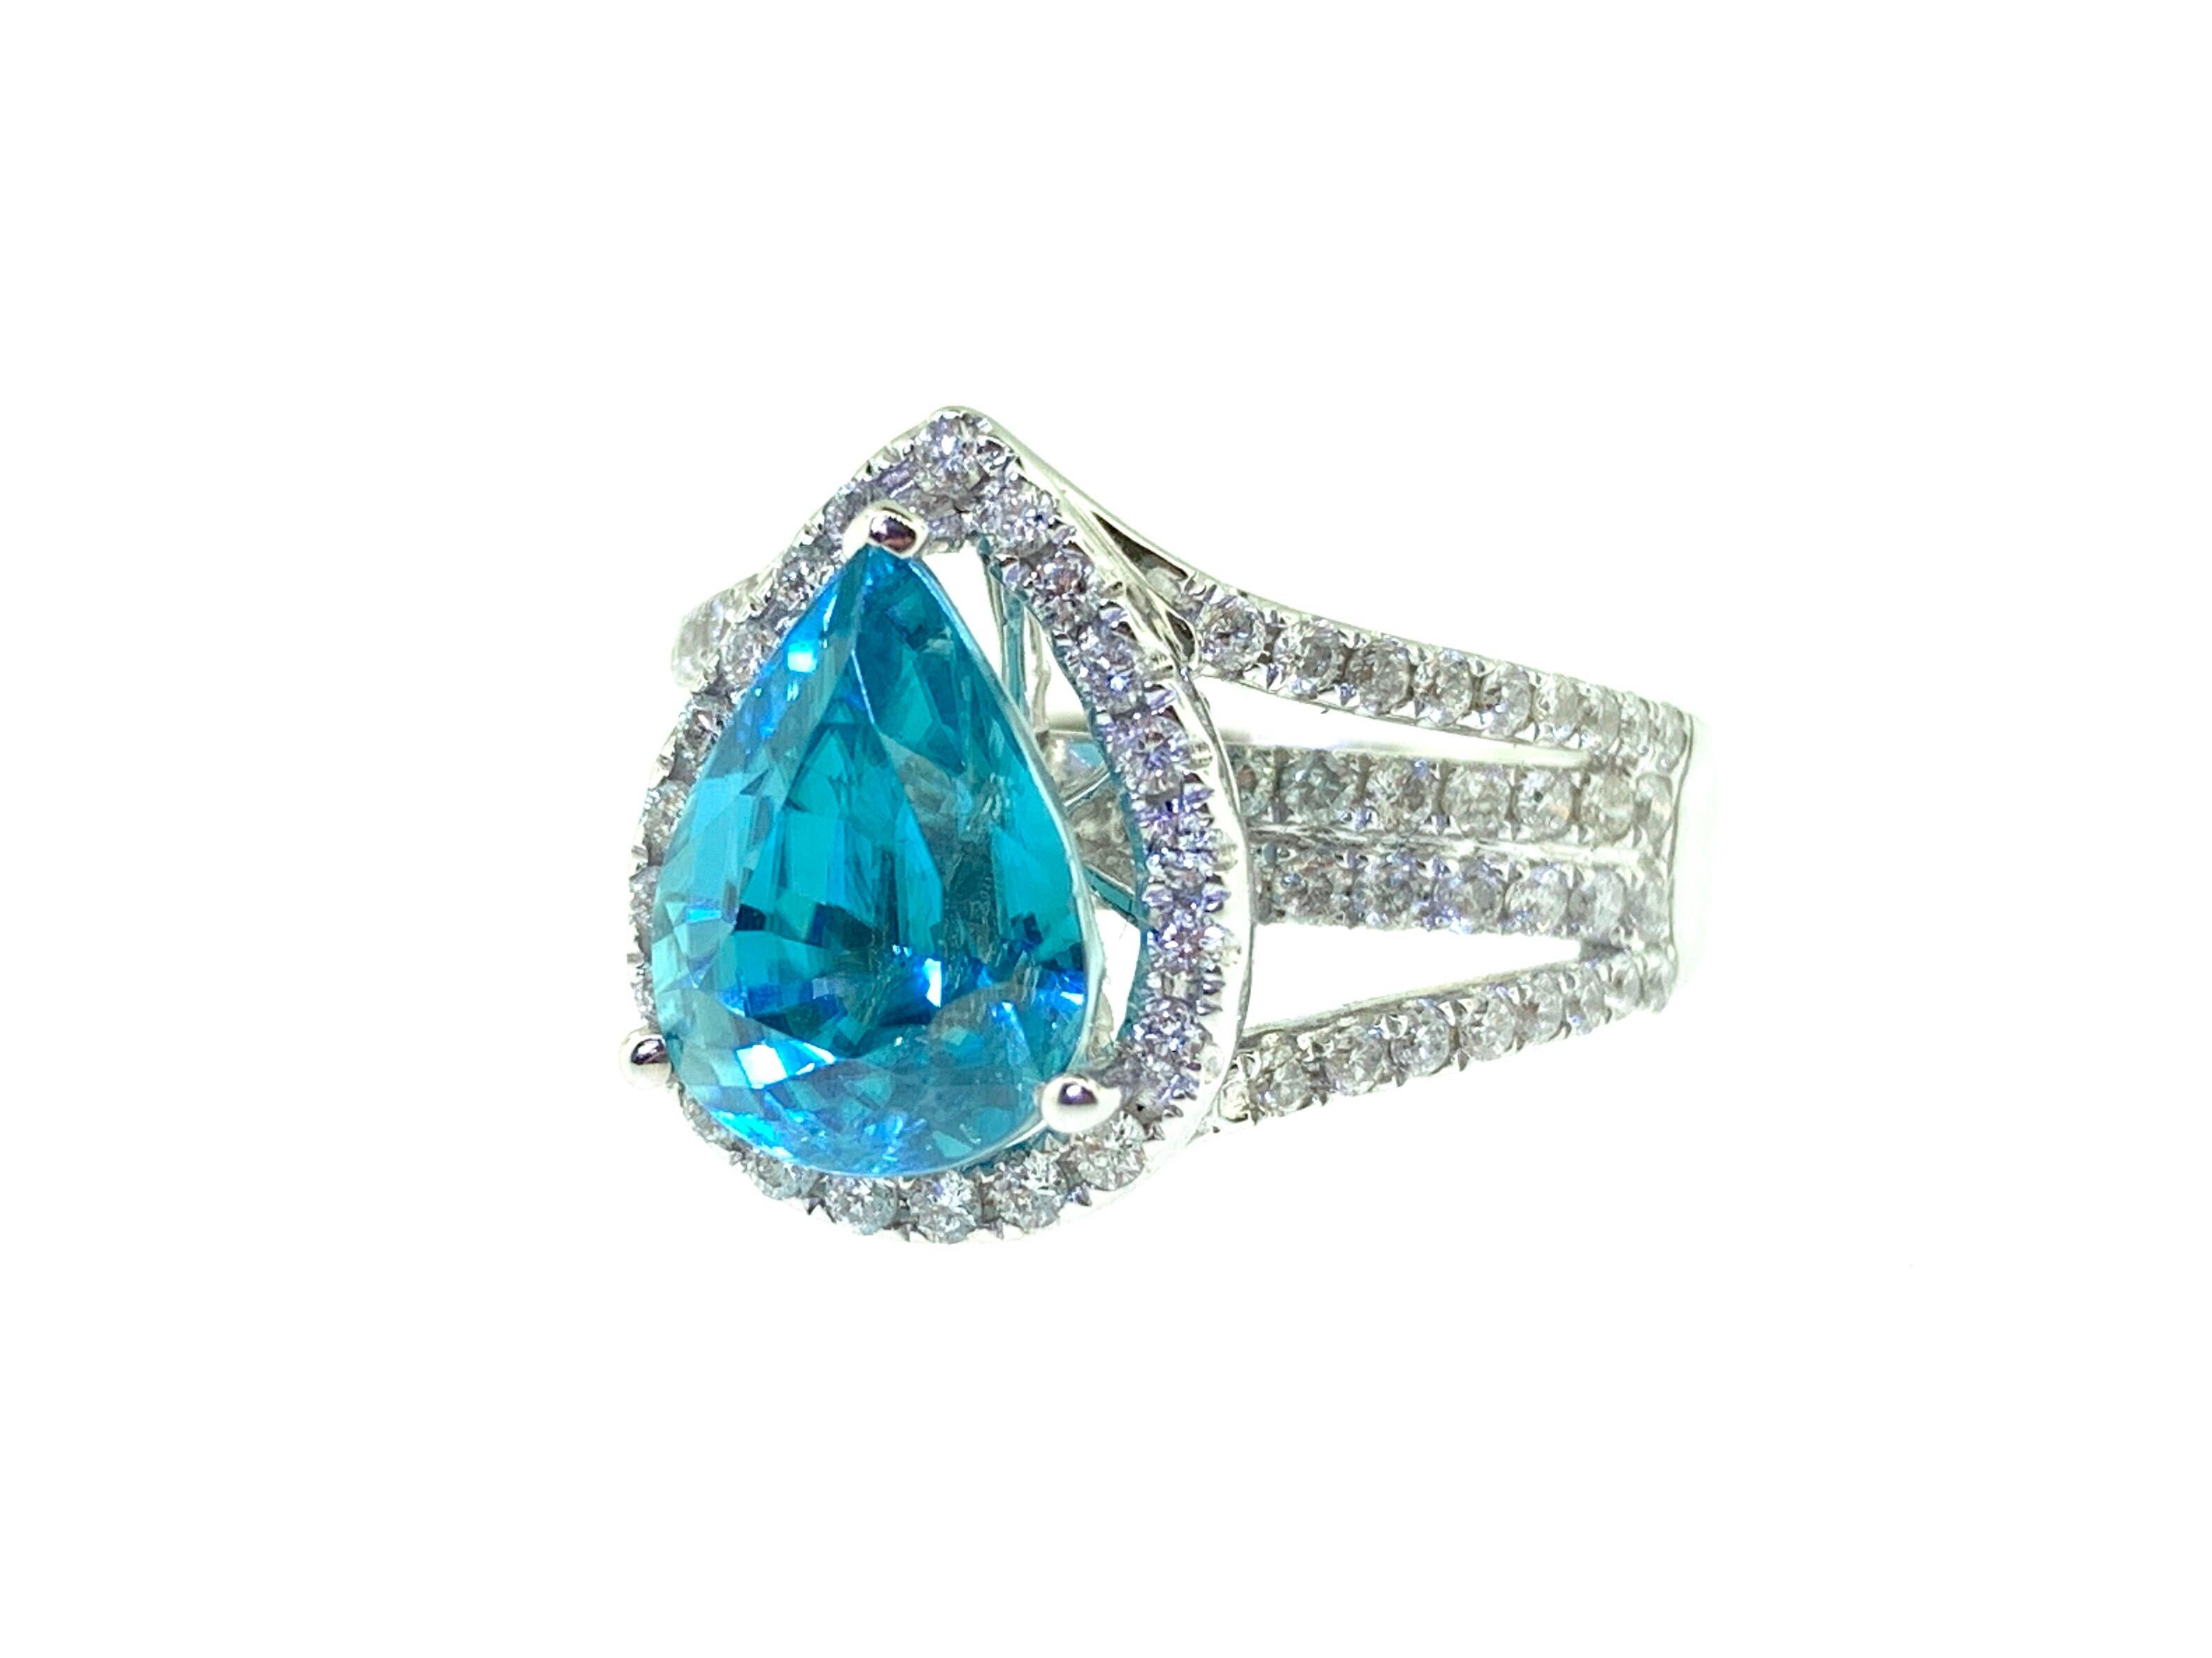 Pear Cut 5.61 Carat Blue Zircon and Diamond Cocktail Ring